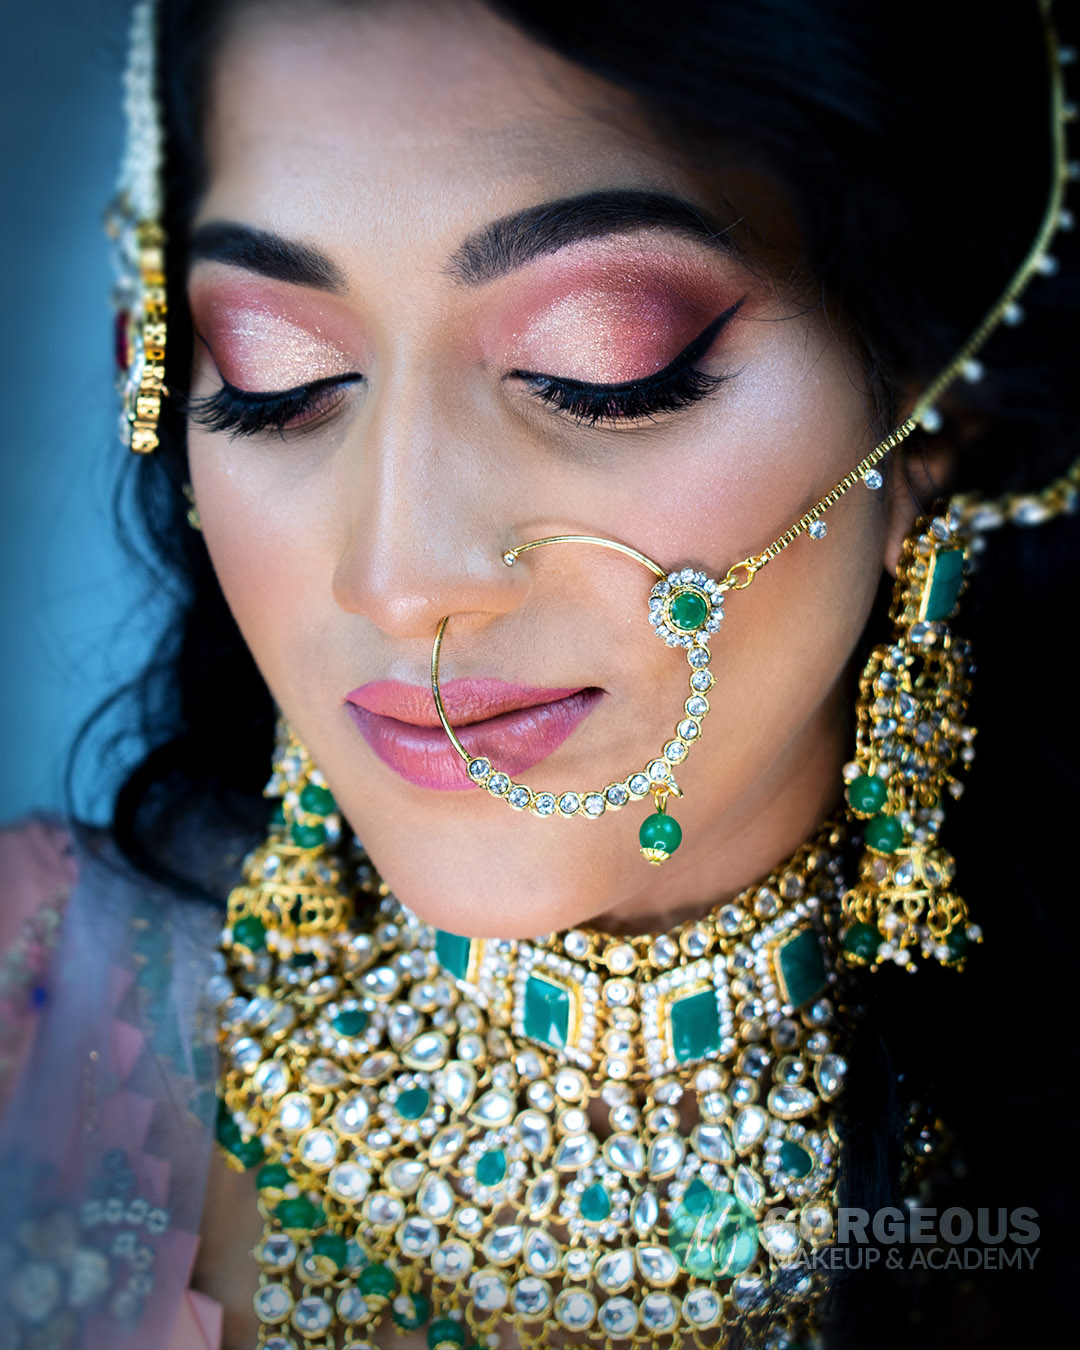 makeup courses - best academy in bangalore